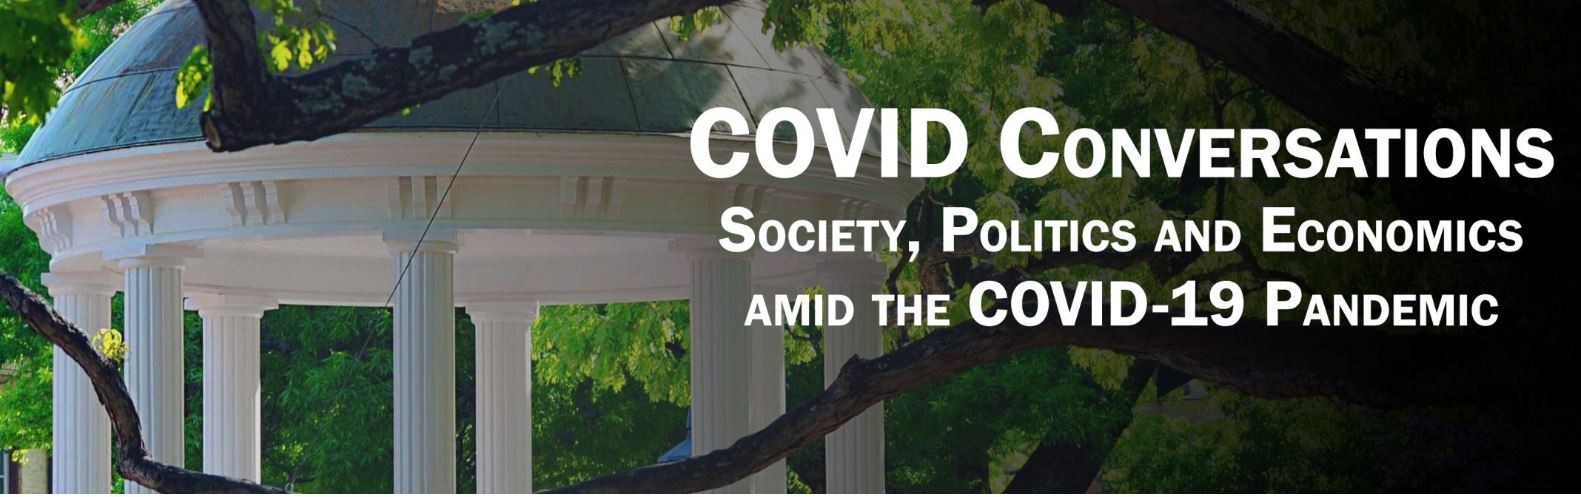 Banner image shows the Old Well with the words "COVID Conversations: Society, Politics and Economics Amid the COVID-19 Pandemic"